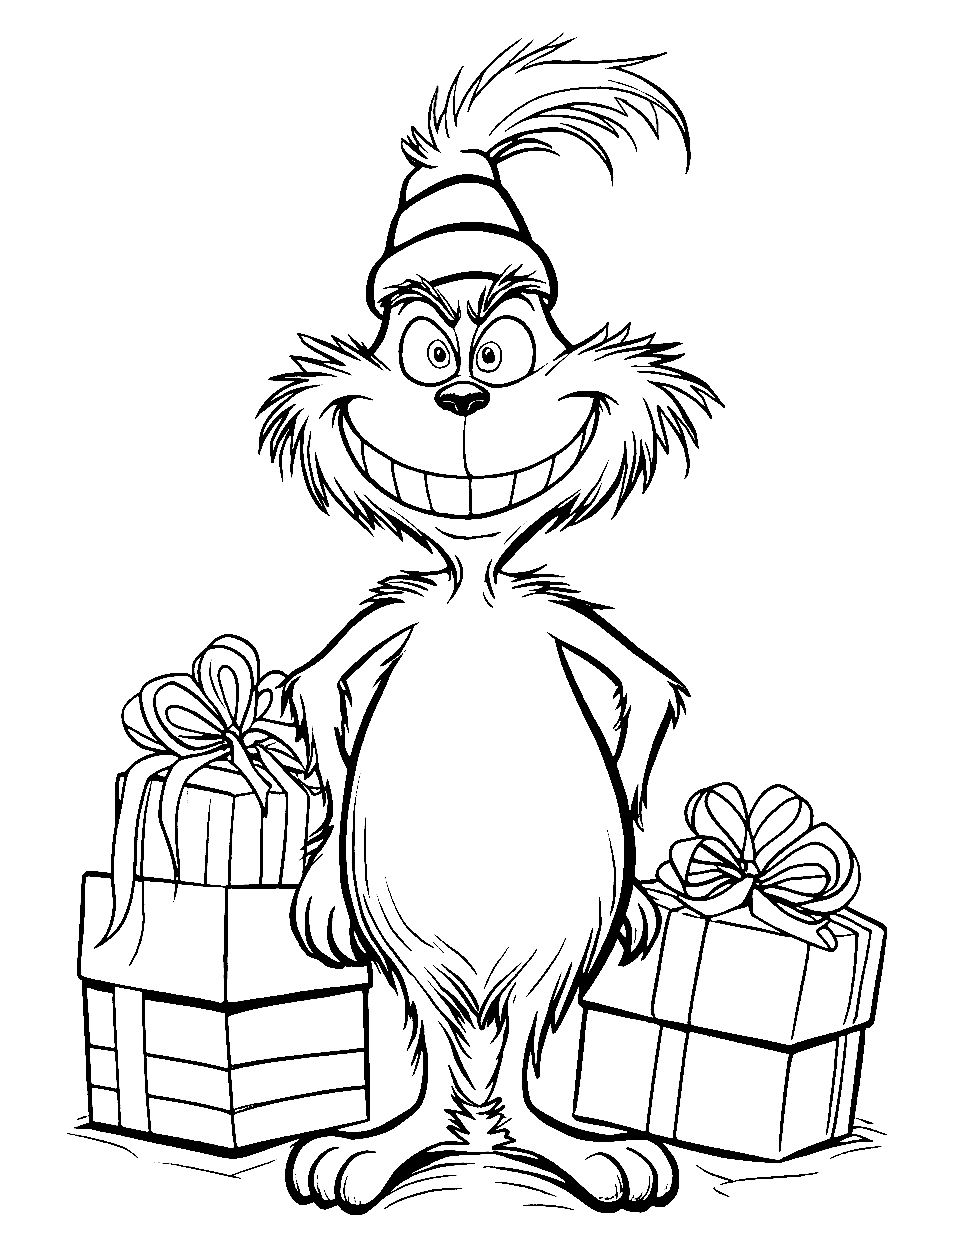 Stolen Gift Coloring Page - The Grinch with stolen gifts behind him, and he is showing his evil grin.